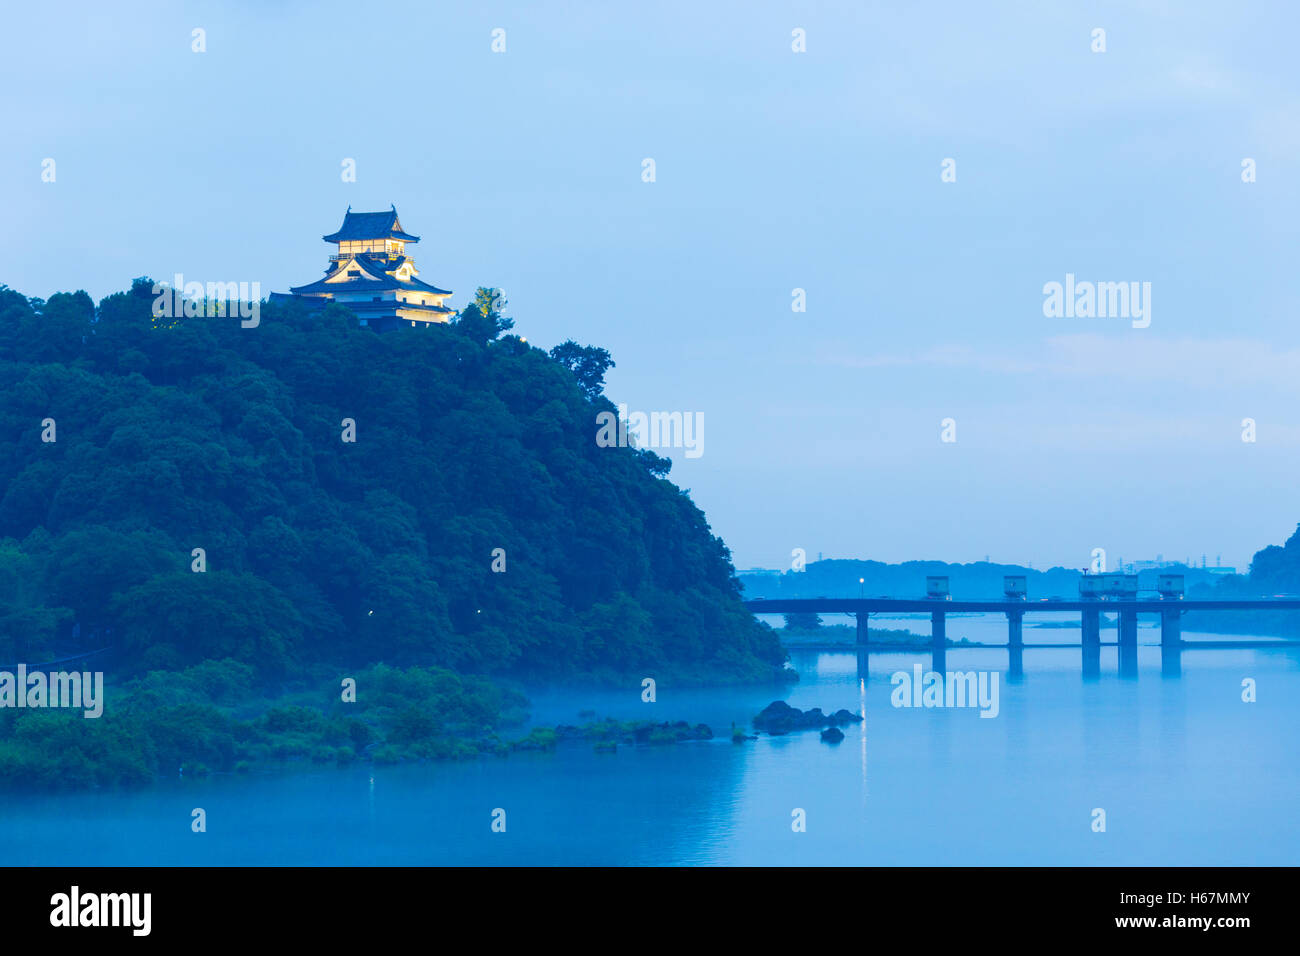 Evening on the Kiso River from distant Inuyama Castle atop a forest hill at blue hour in Gifu Prefecture, Japan. Horizontal Stock Photo